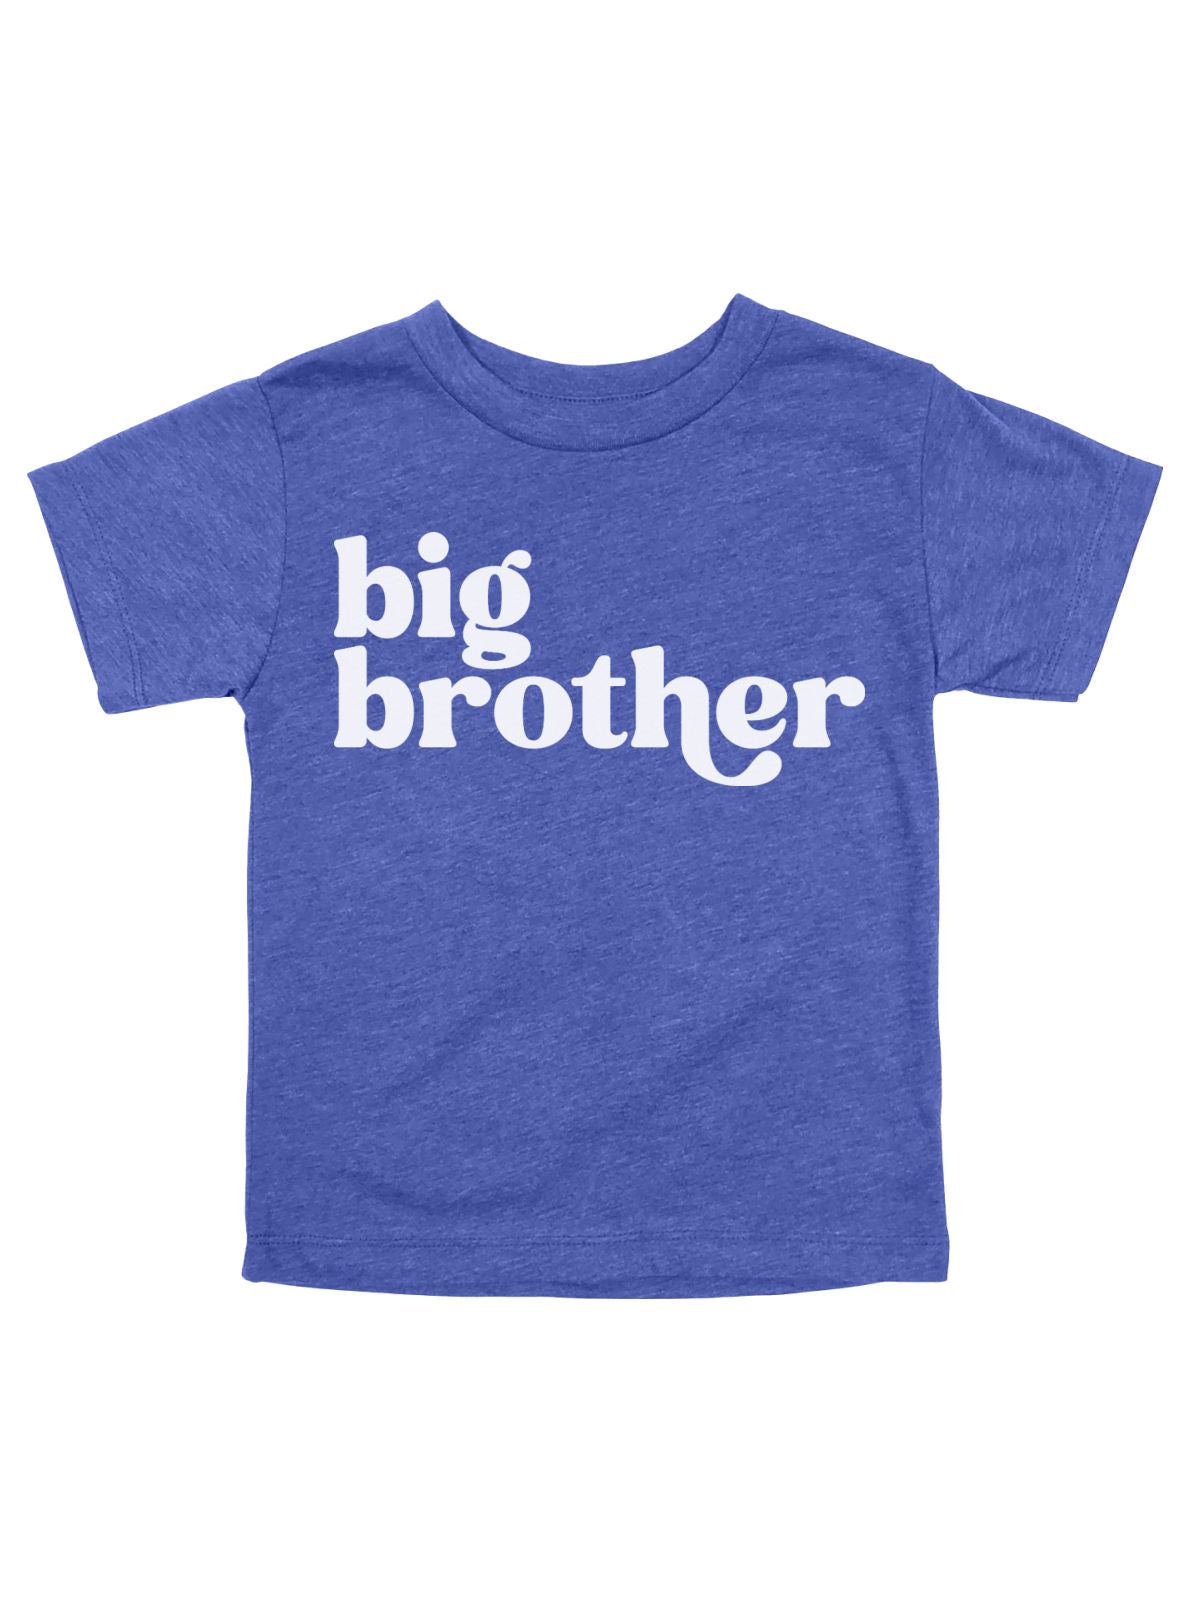 Big Brother Shirt for Boys in Blue